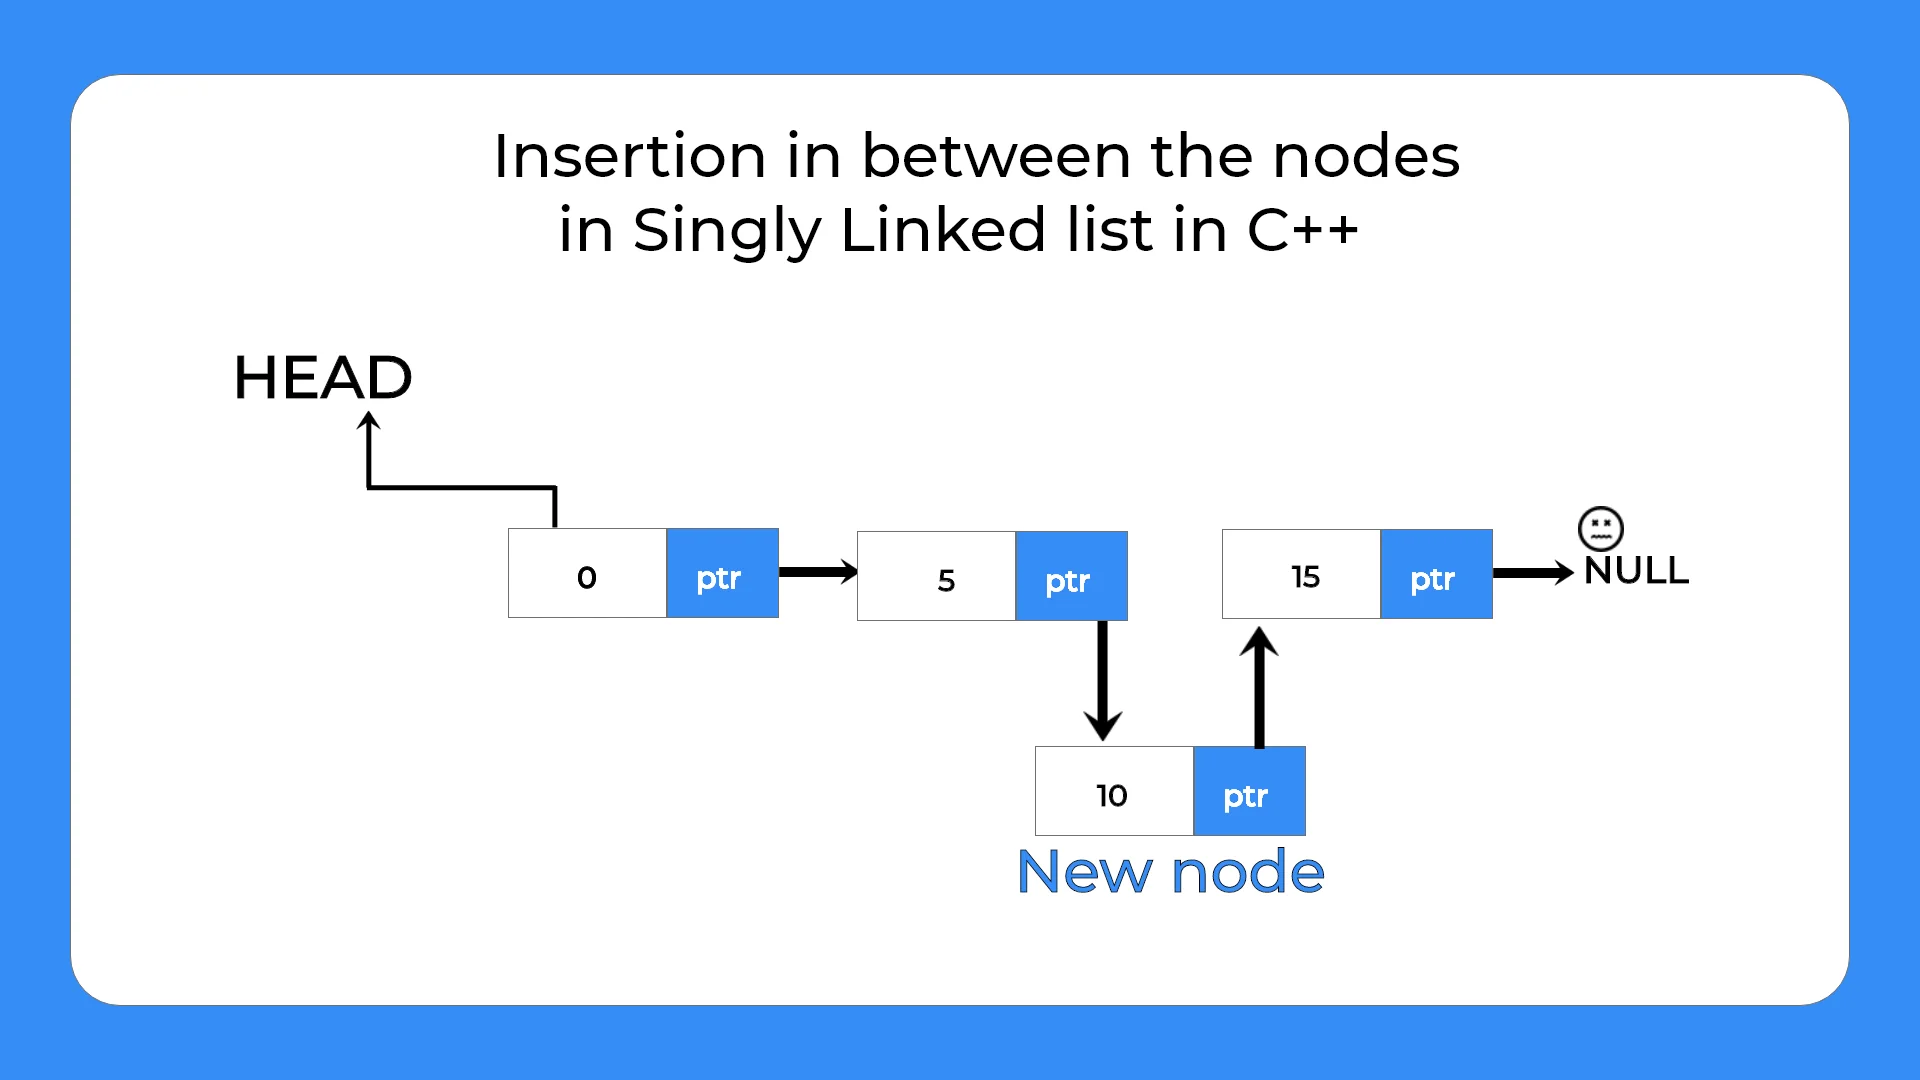 Algorithm for insertion in between the nodes in singly linked list in c++